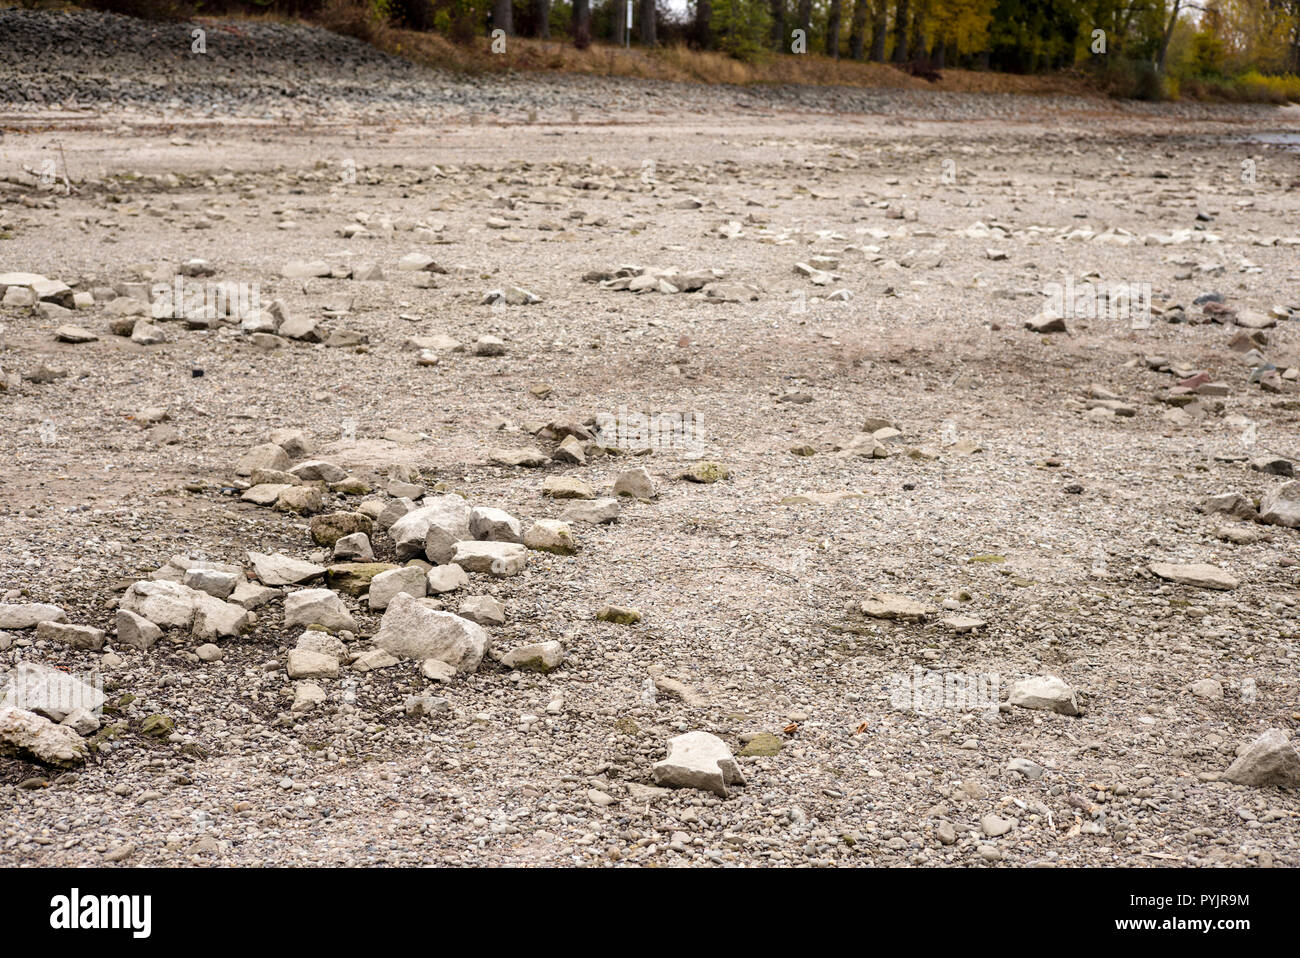 The dried out bed of the Rhine River between Ludwigshafen and Mannheim, Germany, 28 October 2018. A dry summer and an ongoing drought have brought the river to historic low levels, causing a serious impediment for commercial shipping on the river. Credit: Philipp Zechner/Alamy Live News Stock Photo